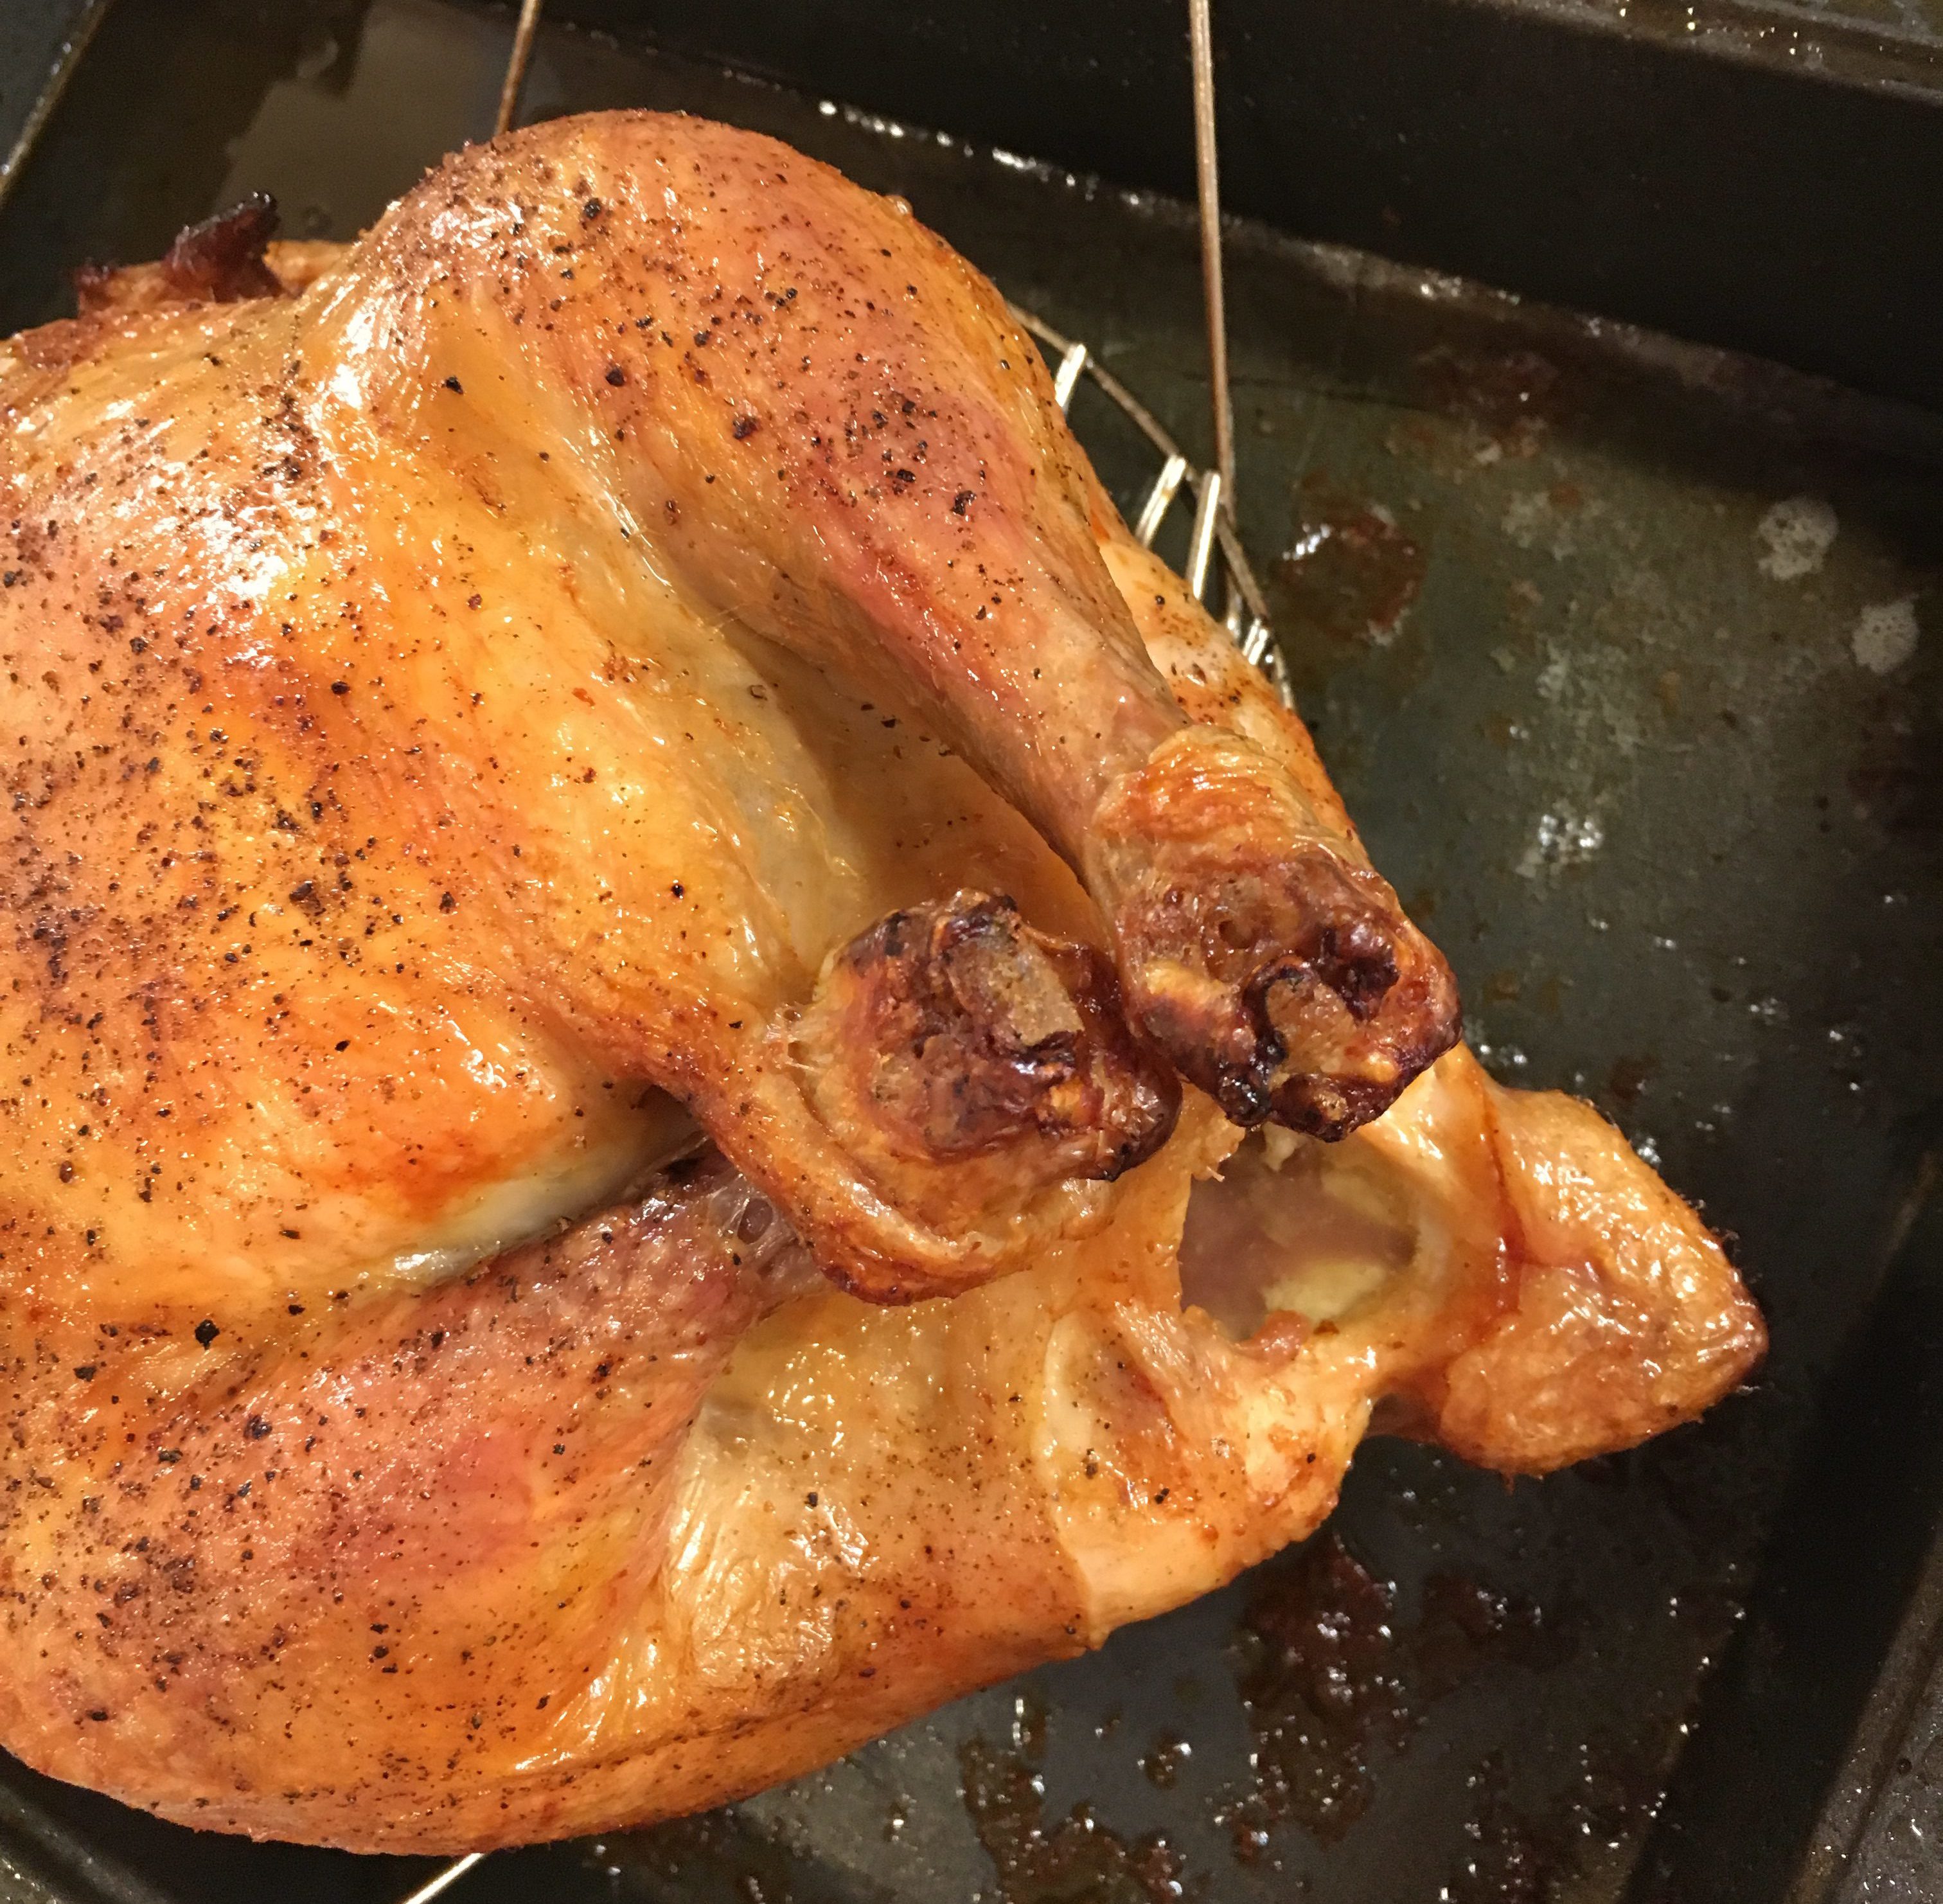 A Plastic Surgery style oven roasted chicken